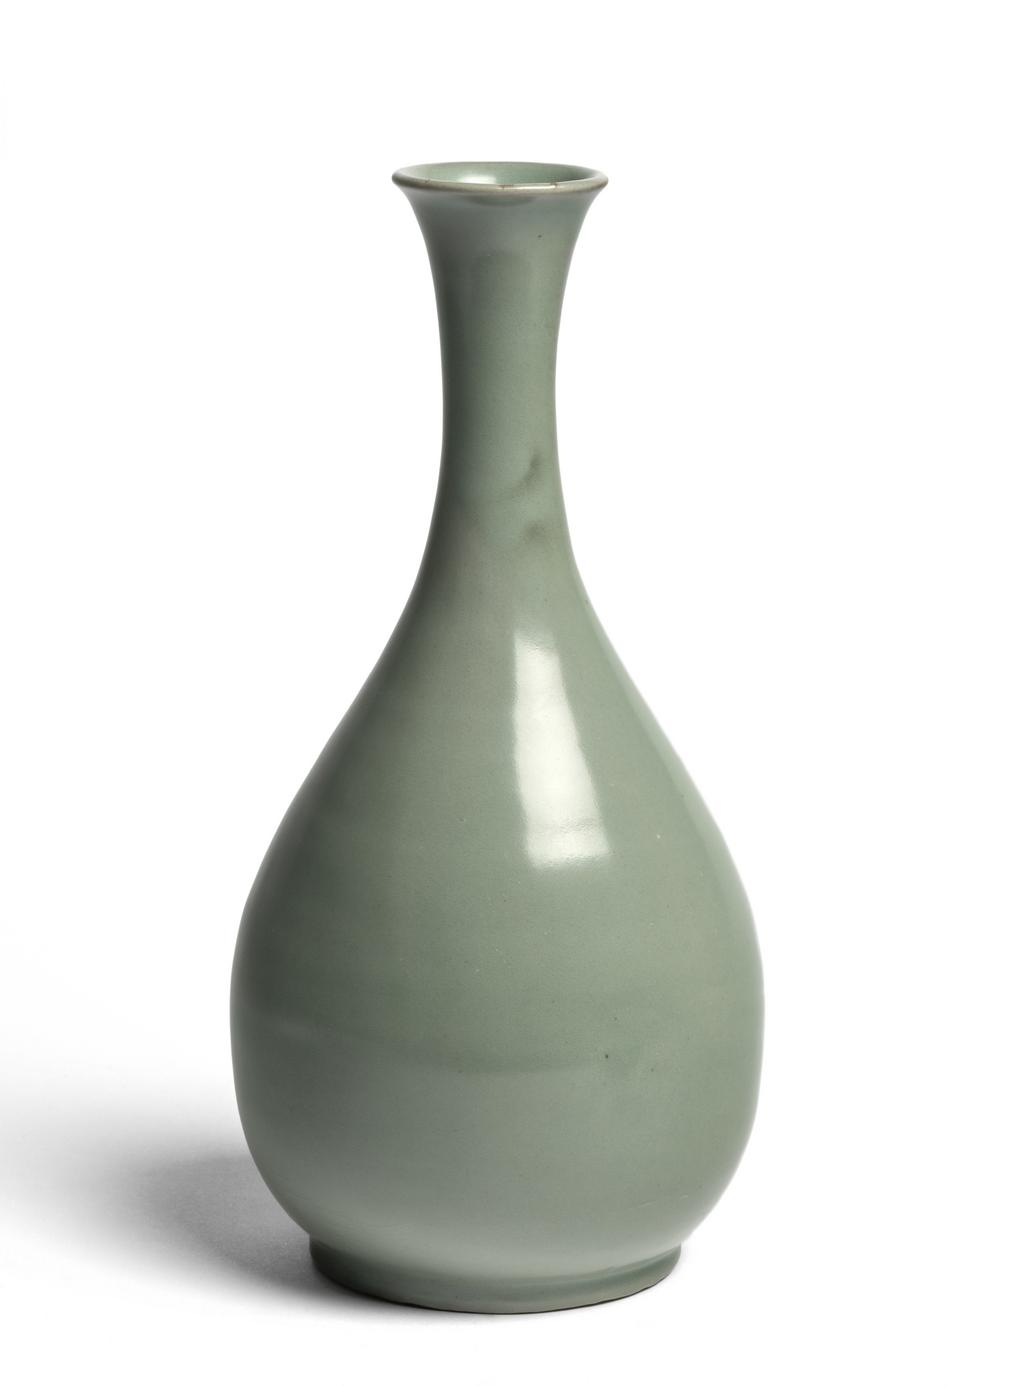 An image of Wine bottle. Unknown pottery, Korea, South Cholla province, Kangjin-gun, Sadang-ri kilns. This bottle has an elegant outline, with a long neck that flares towards the mouth, and a pear-shaped body. It is completely plain. The foot is wide but very low. The body is of fine clay; the clear semi-transparent glaze is evenly applied all over the body and subtly shimmers in a fine jade colour. The foot is completely glazed, and the base shows five quartzite spur-marks. Stoneware, thrown and celadon-glazed. Height, bottle, 29.6 cm, diameter, rim, 5.4 cm, diameter, foot, 9.8 cm, circa 1100-1150. Koryo Dynasty.